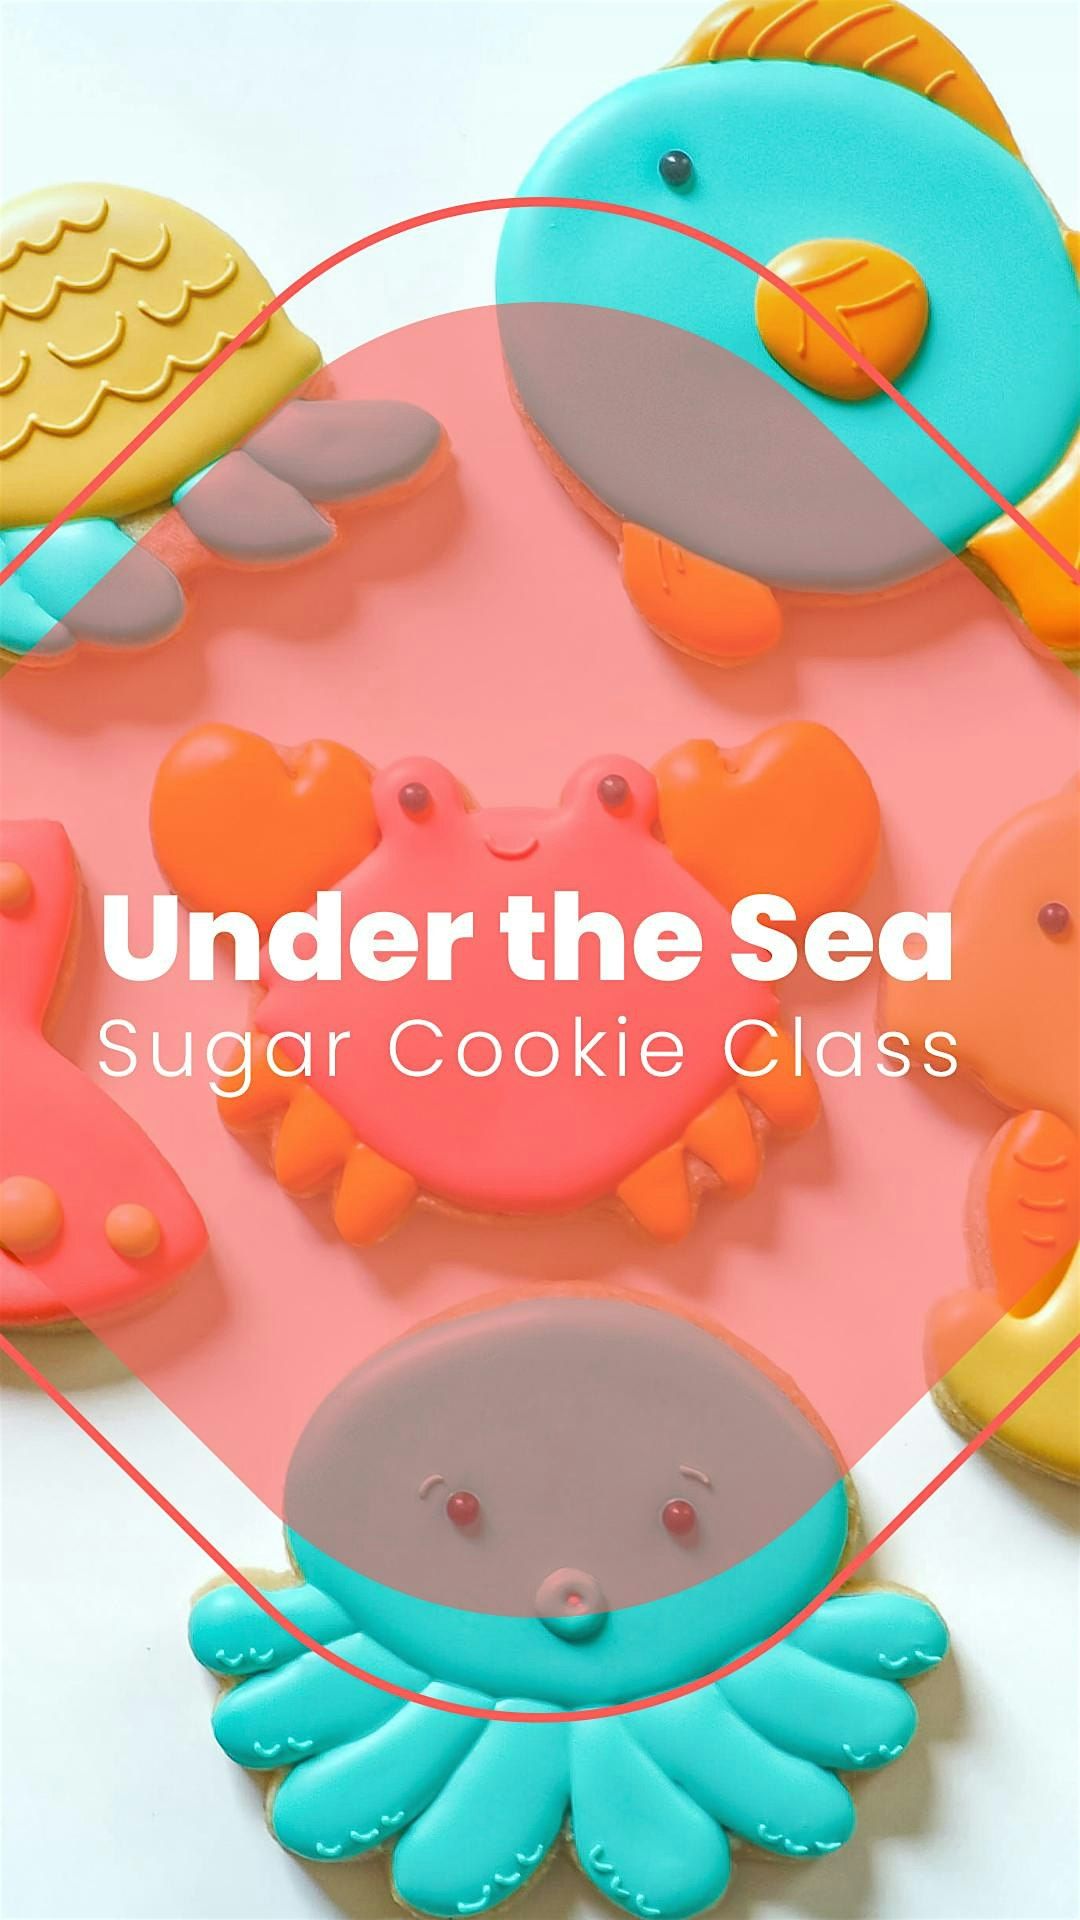 5:00 PM - Under the Sea Sugar Cookie Decorating Class